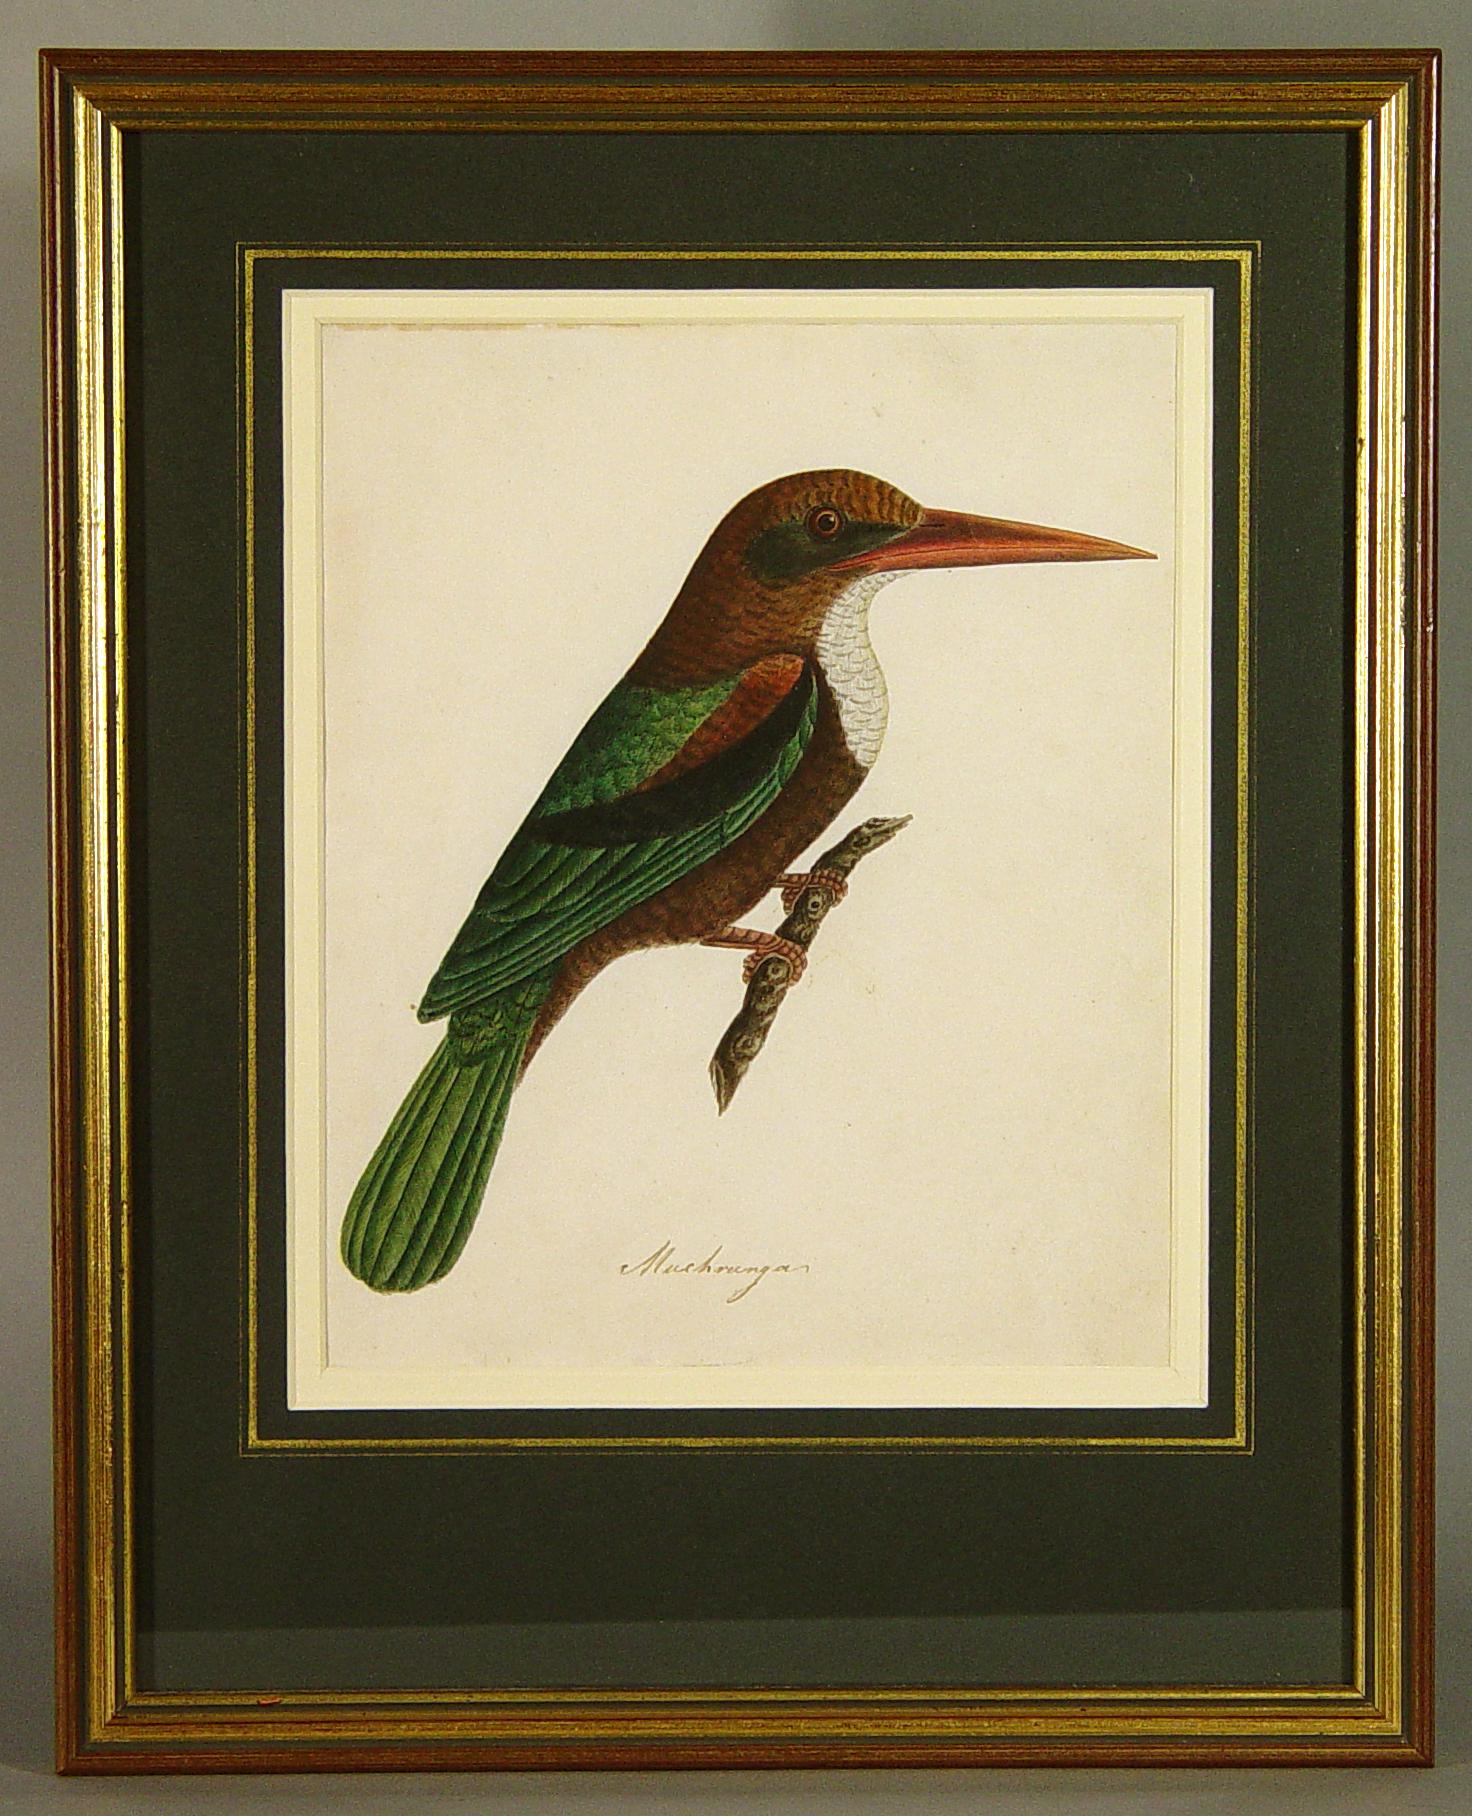 East India Company School pictures of the birds,
Titled Muchrunga, Kouroo, Kanra, and Bilace.
India, circa 1780-1820.

Could sell individually.

The pen, ink and watercolor studies each depict a bird perched on a branch inscribed with the titled